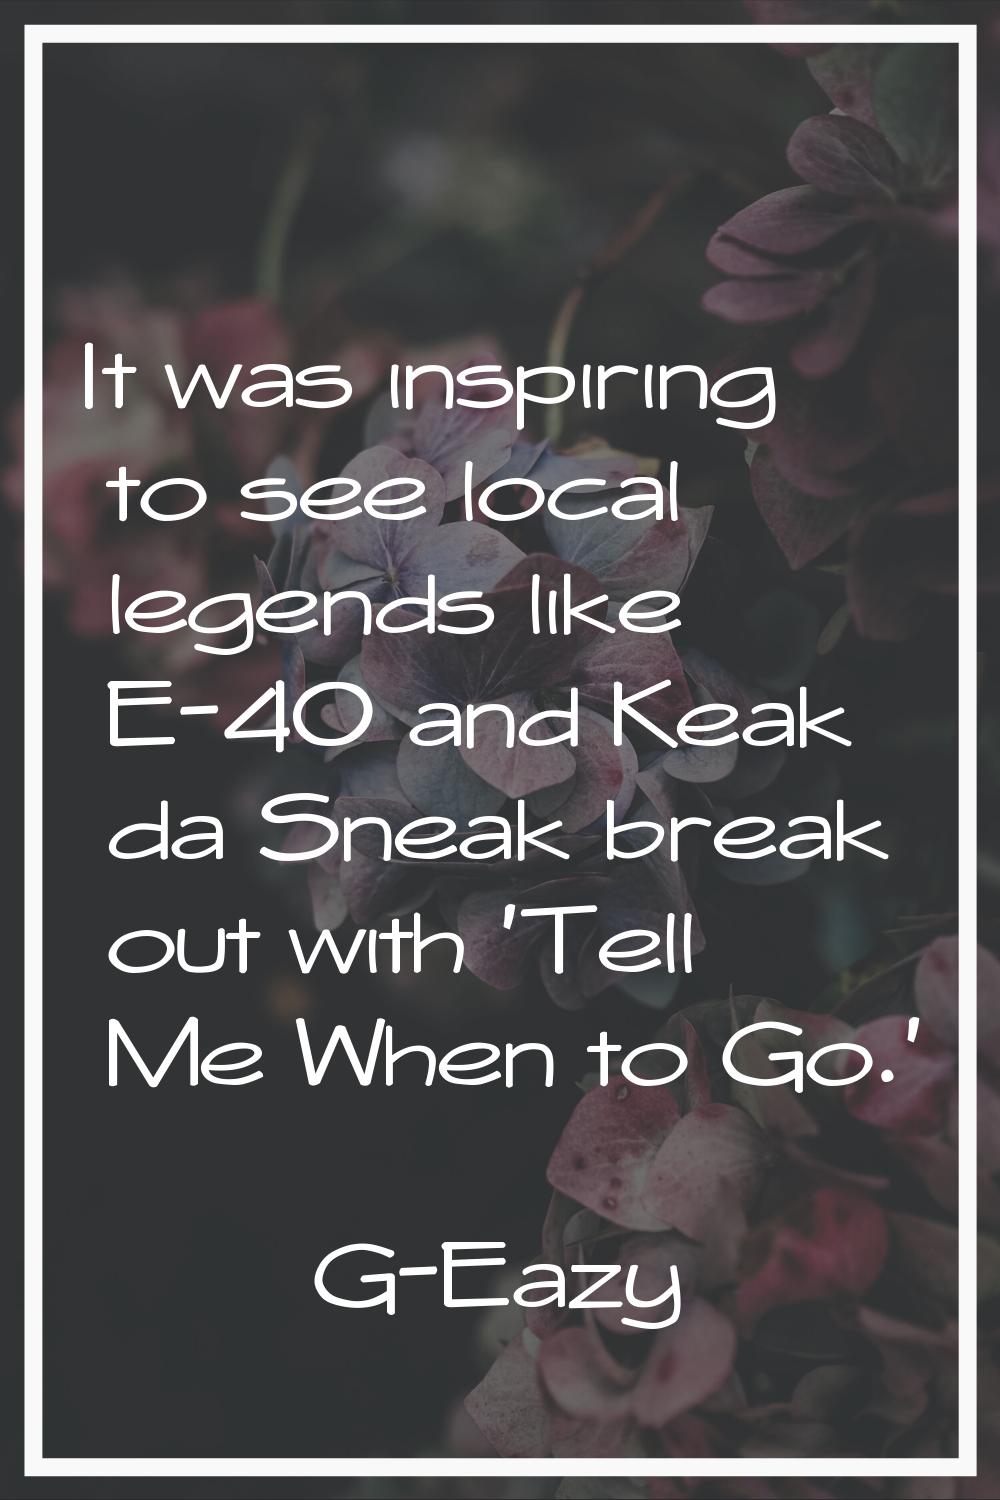 It was inspiring to see local legends like E-40 and Keak da Sneak break out with 'Tell Me When to G